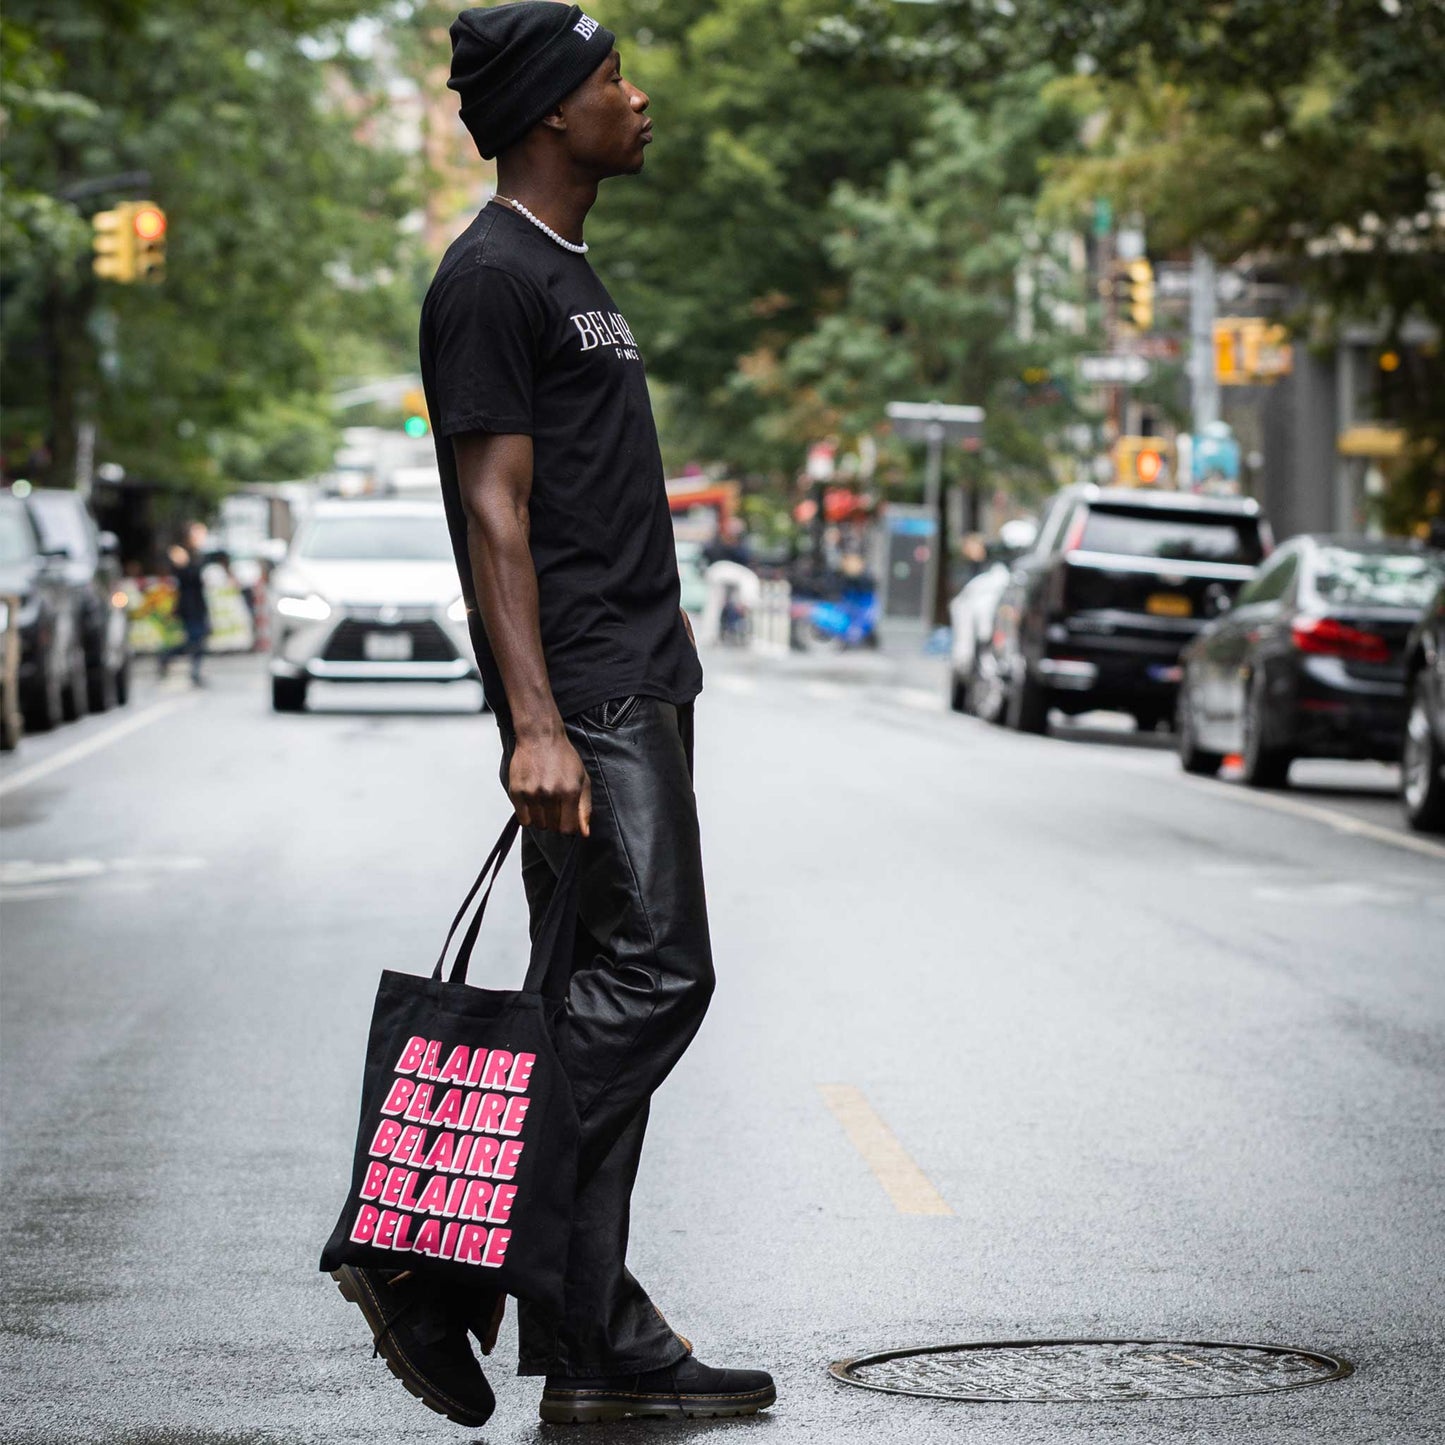 Luc Belaire Tote Bag